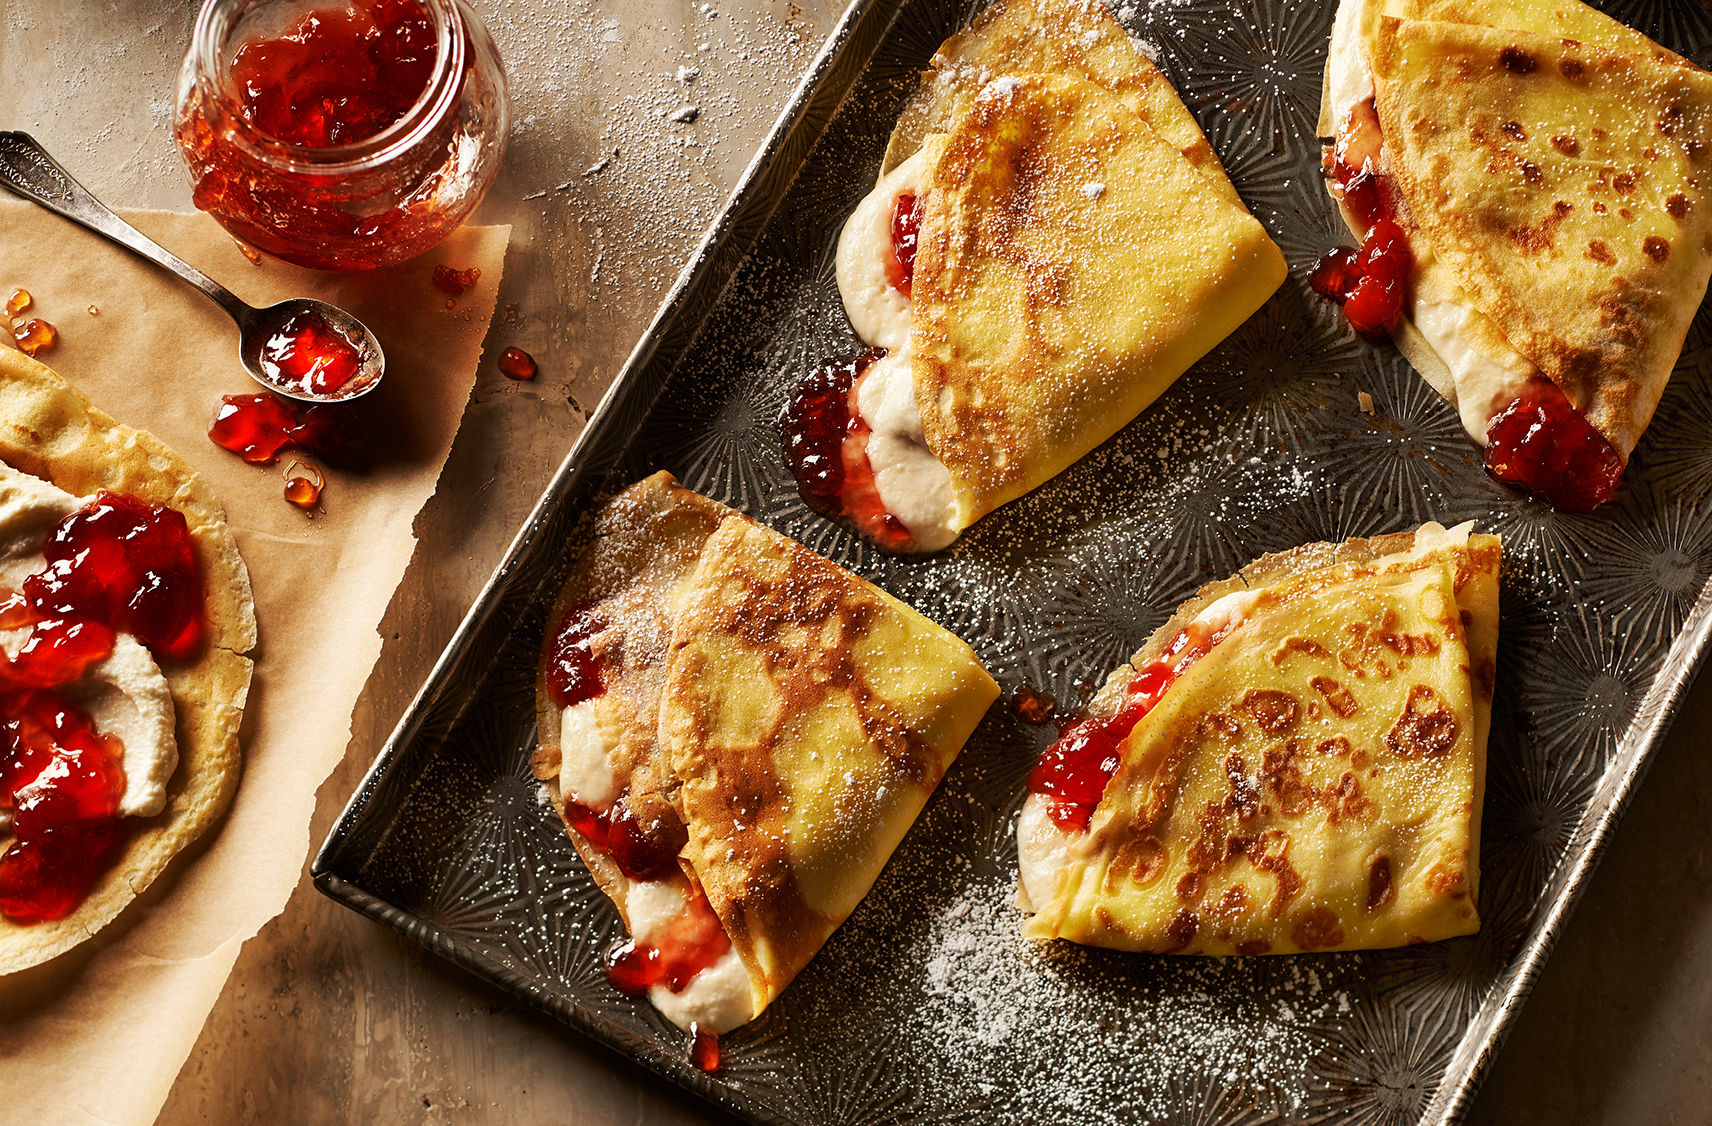 Fluffy golden crepes stuffed with creamy mascarpone and cherry spread